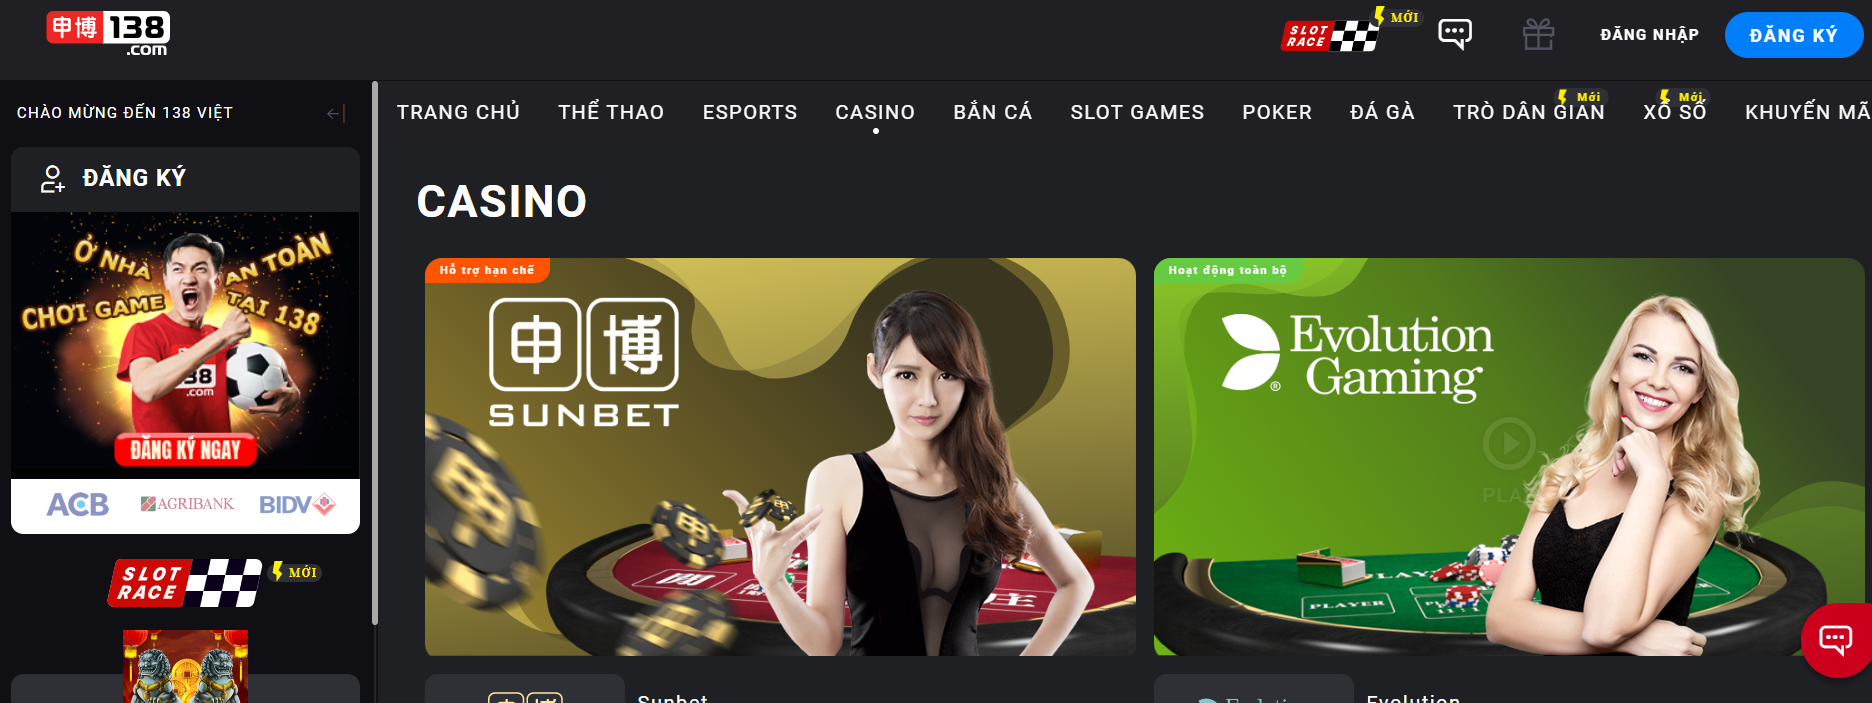 Giao diện 138BET